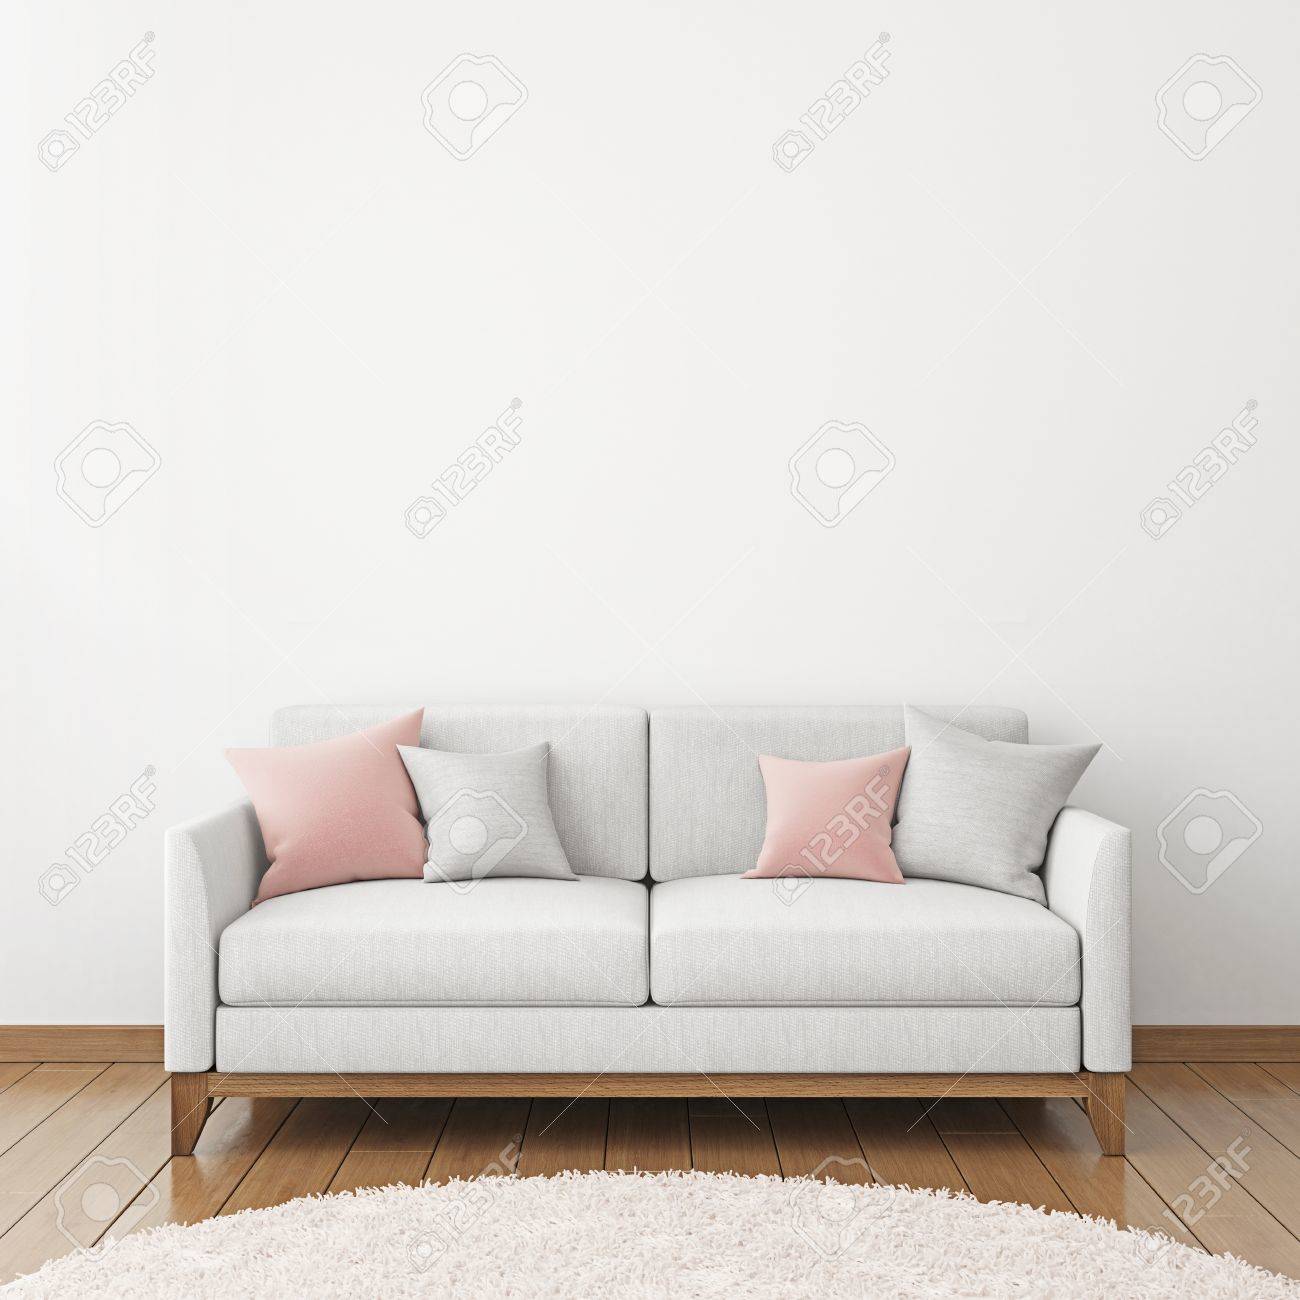 Interior Wall Mock Up With Fabric Sofa And Pillows On White